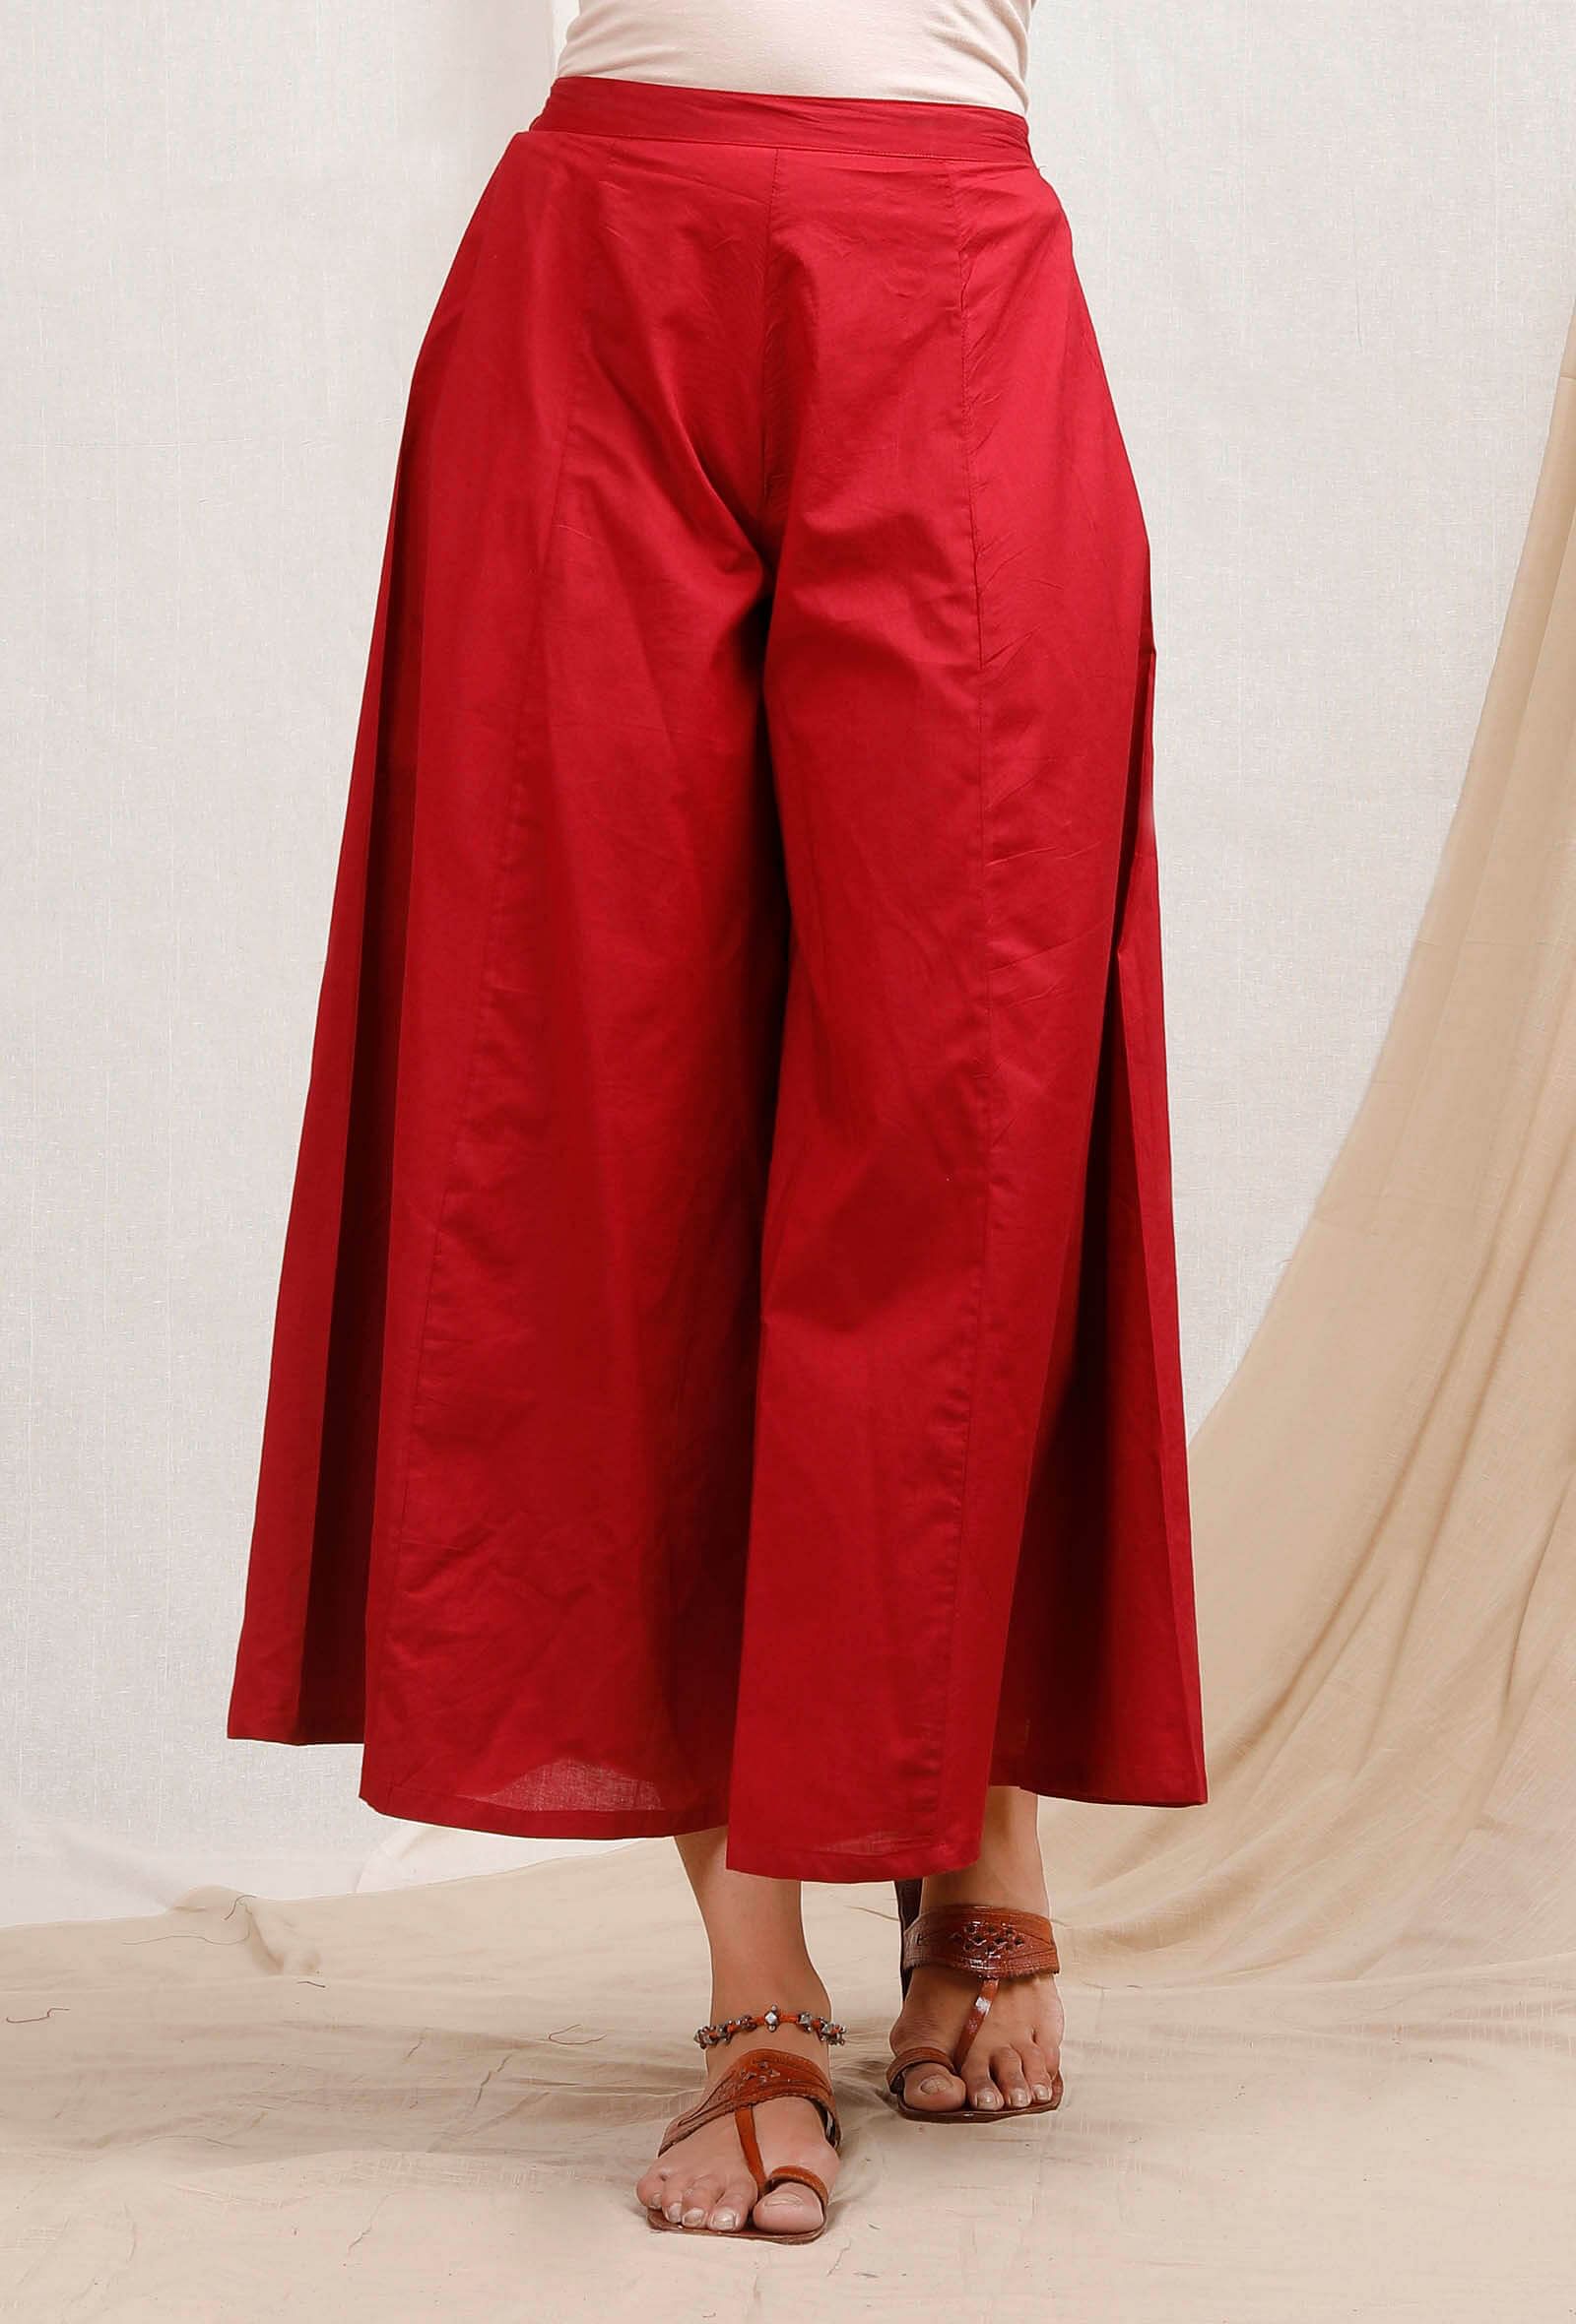 Buy Online Red Cotton Palazzo for Women at Best Price at Rangriticom   ASSORTED3988SS20RED